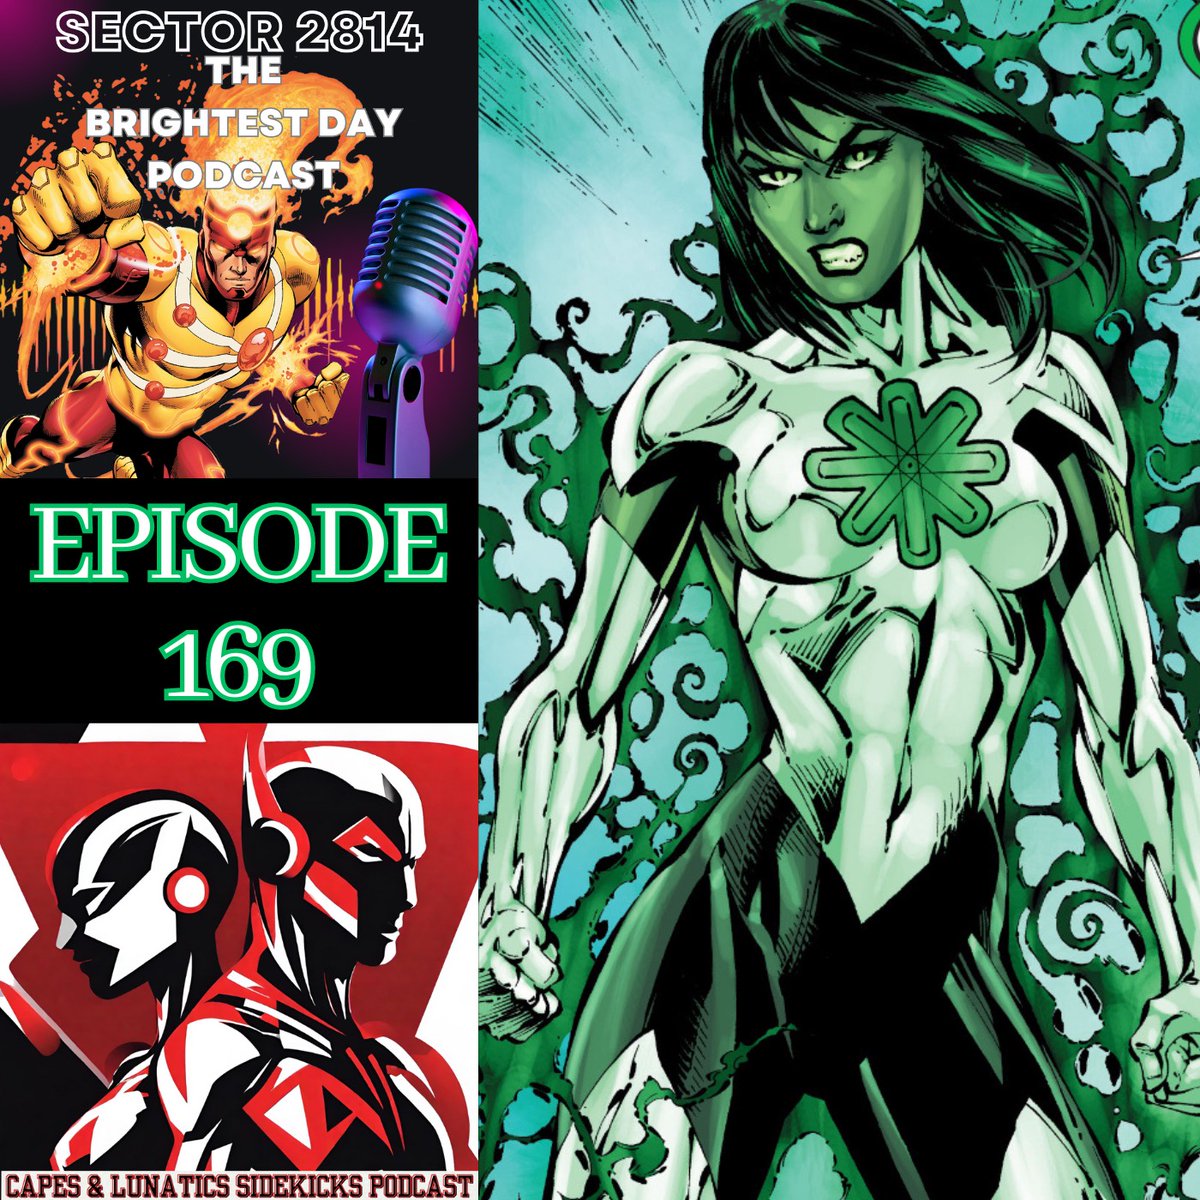 Sector 2814: #GreenLantern Podcast Episode #169  
Phil ,Will, Justin and Lilith review #JusticeLeague of America #44-#48 and #JusticeSociety of America #41-#42.  
🍎 Apple Podcasts: tinyurl.com/bdz3v4jv 
🎧 Spotify: tinyurl.com/yyhfy25u 
▶️ YouTube: tinyurl.com/yc5ch2mw